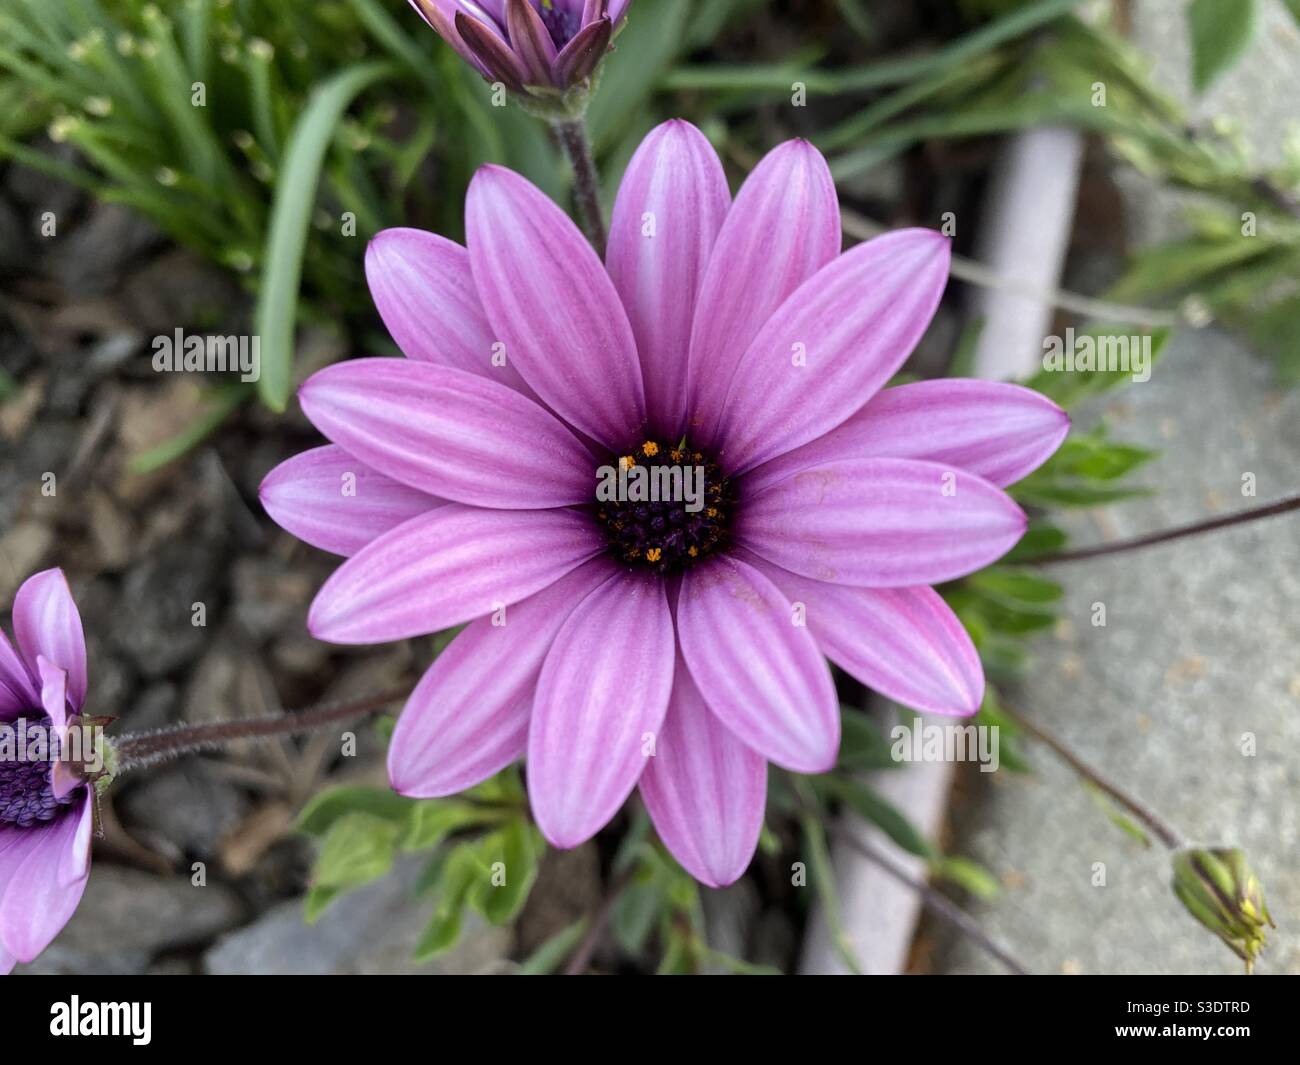 Lilac-colored flower with 15 petals in garden Stock Photo